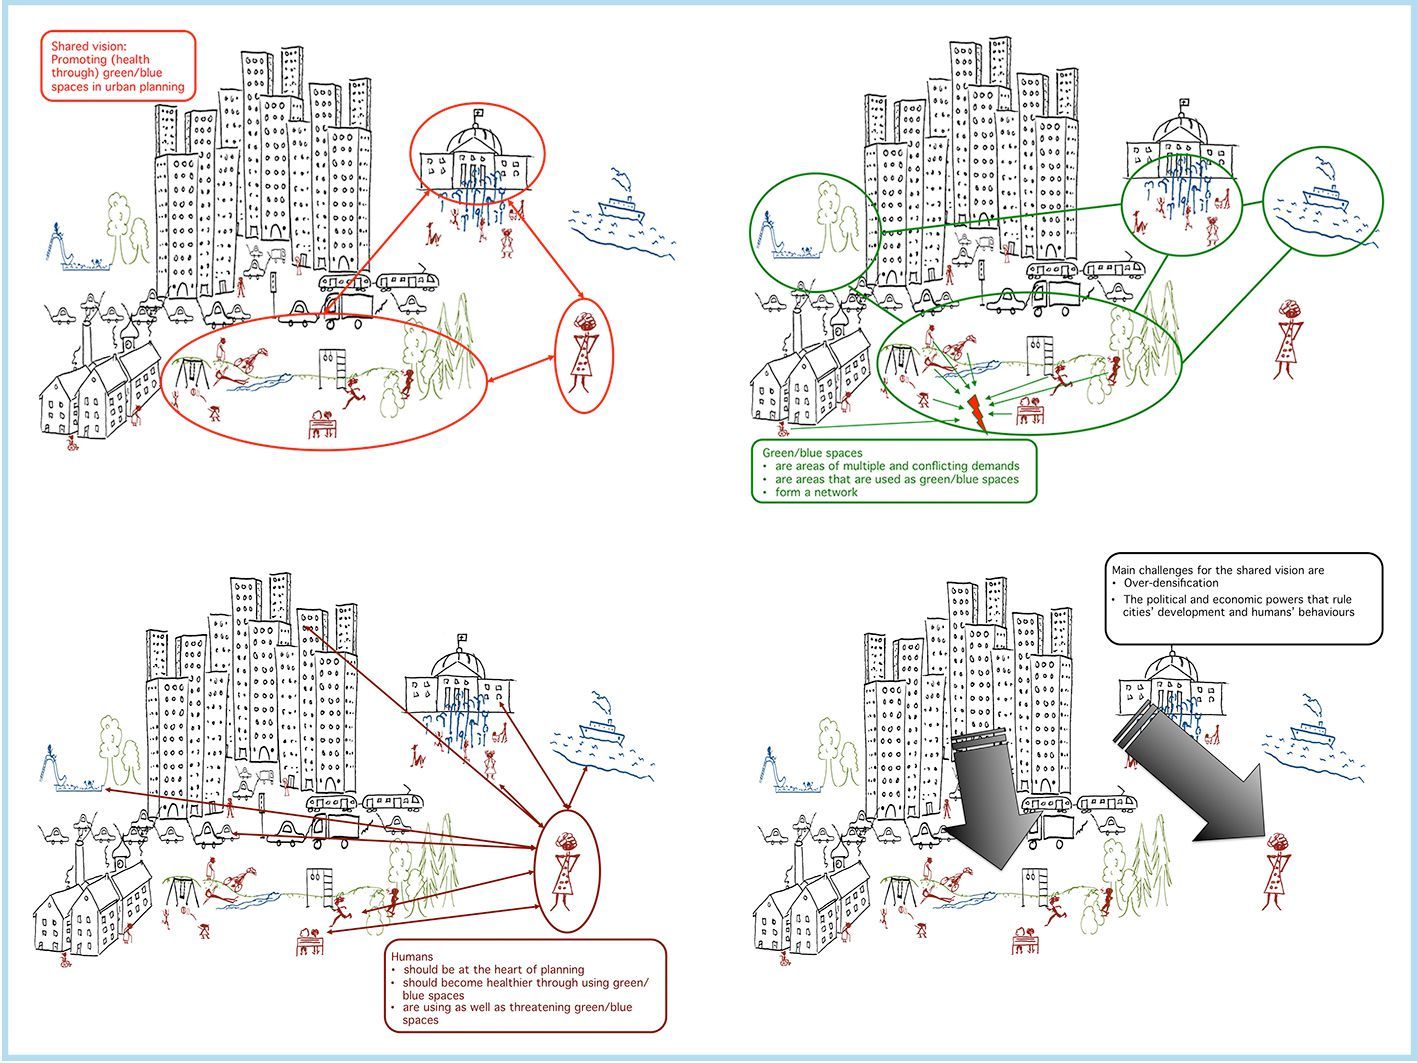 Figure 1: Rich picture of “Promoting (health through) green/blue spaces in urban planning” drawn by the moderator and based on the board members’ rich pictures. In red is the shared vision we started with. The other coloured systems and statements summarize insights stressed by the board members when explaining their individual rich picture to the group.